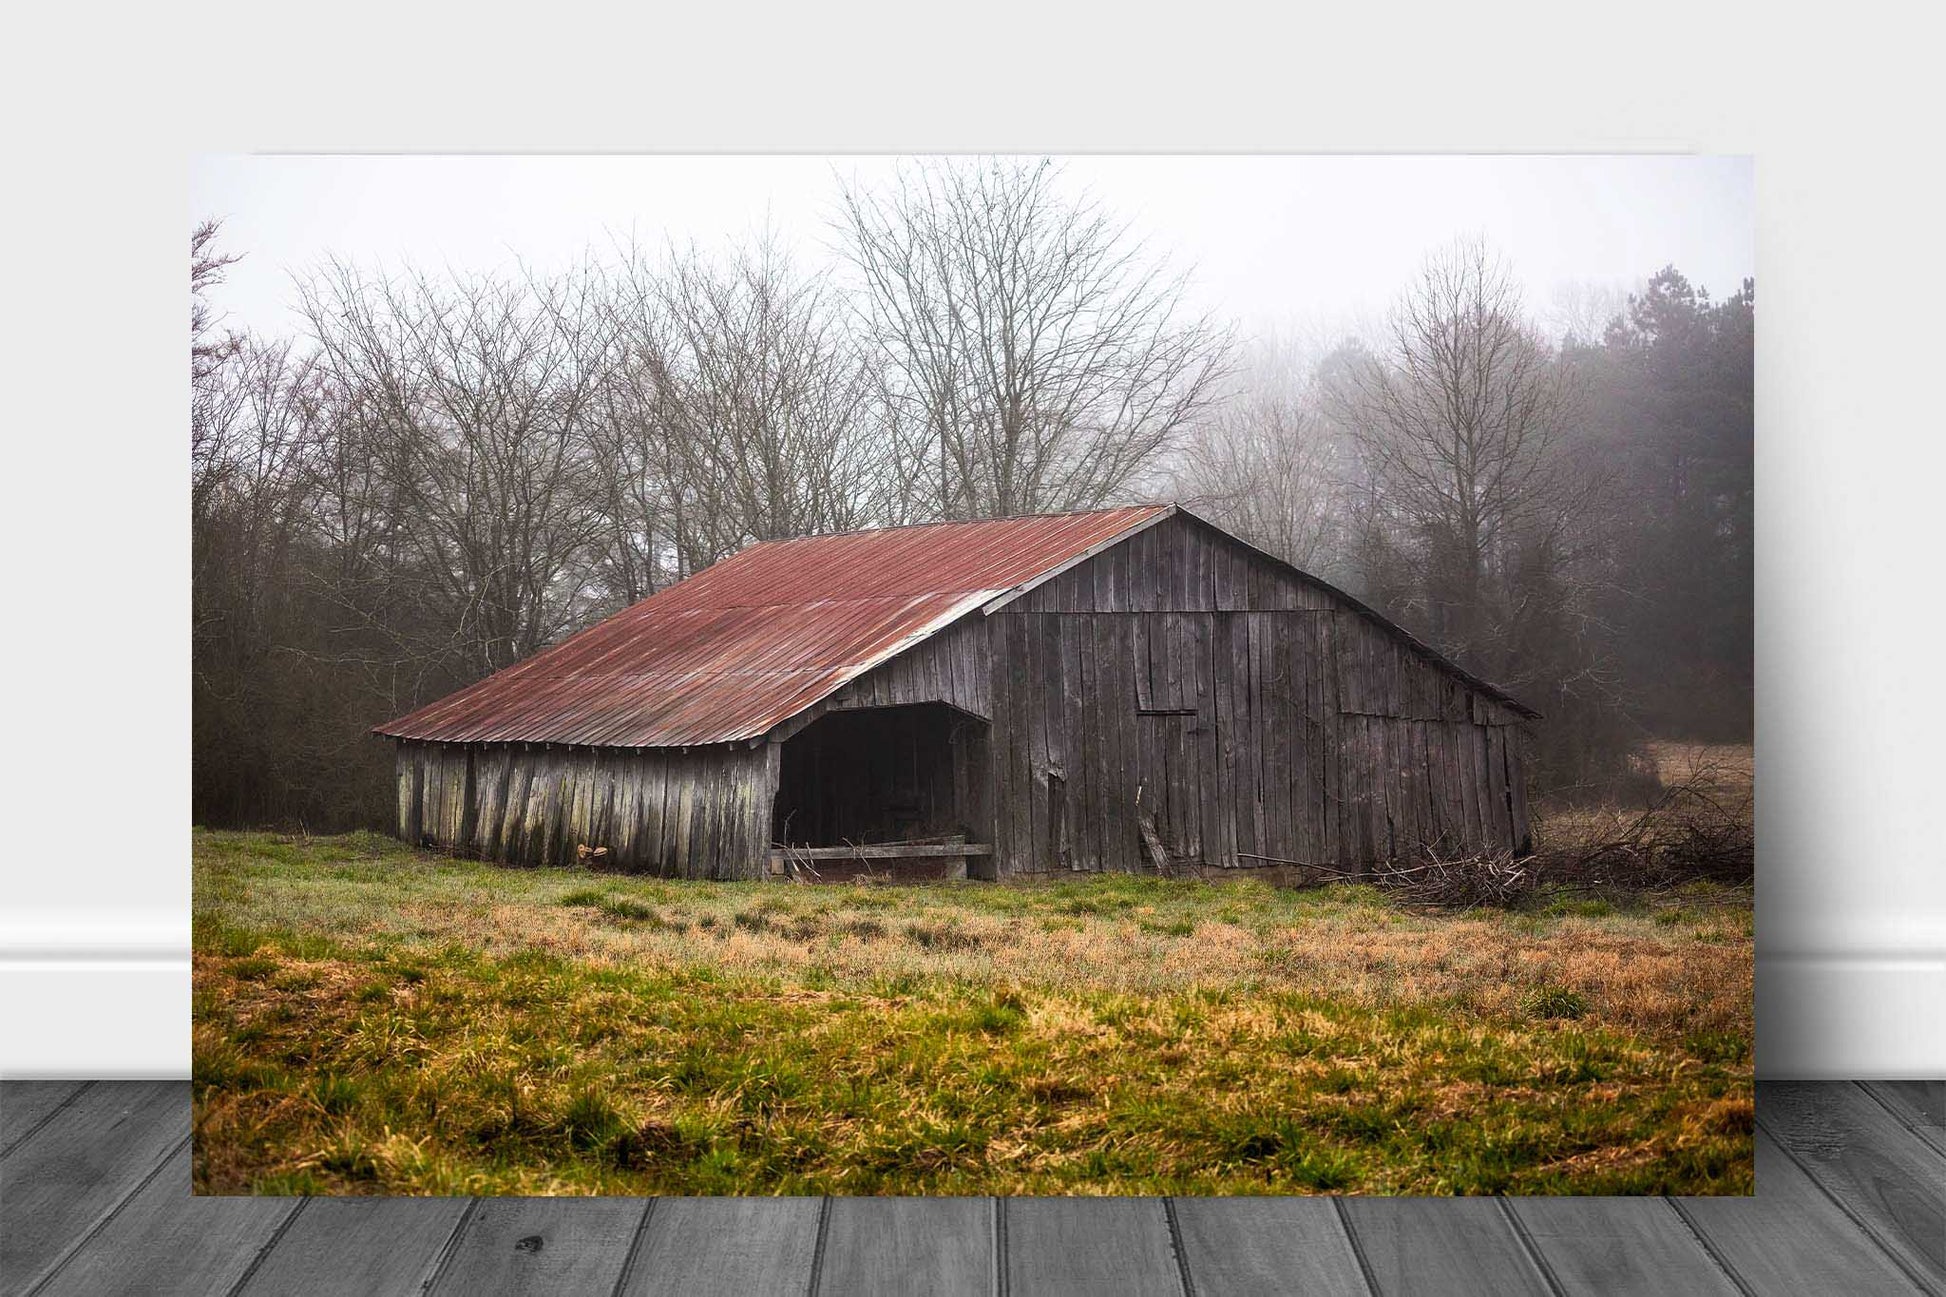 Country metal print wall art of an old wooden barn with a rusted tin roof on a foggy spring day in Arkansas by Sean Ramsey of Southern Plains Photography.